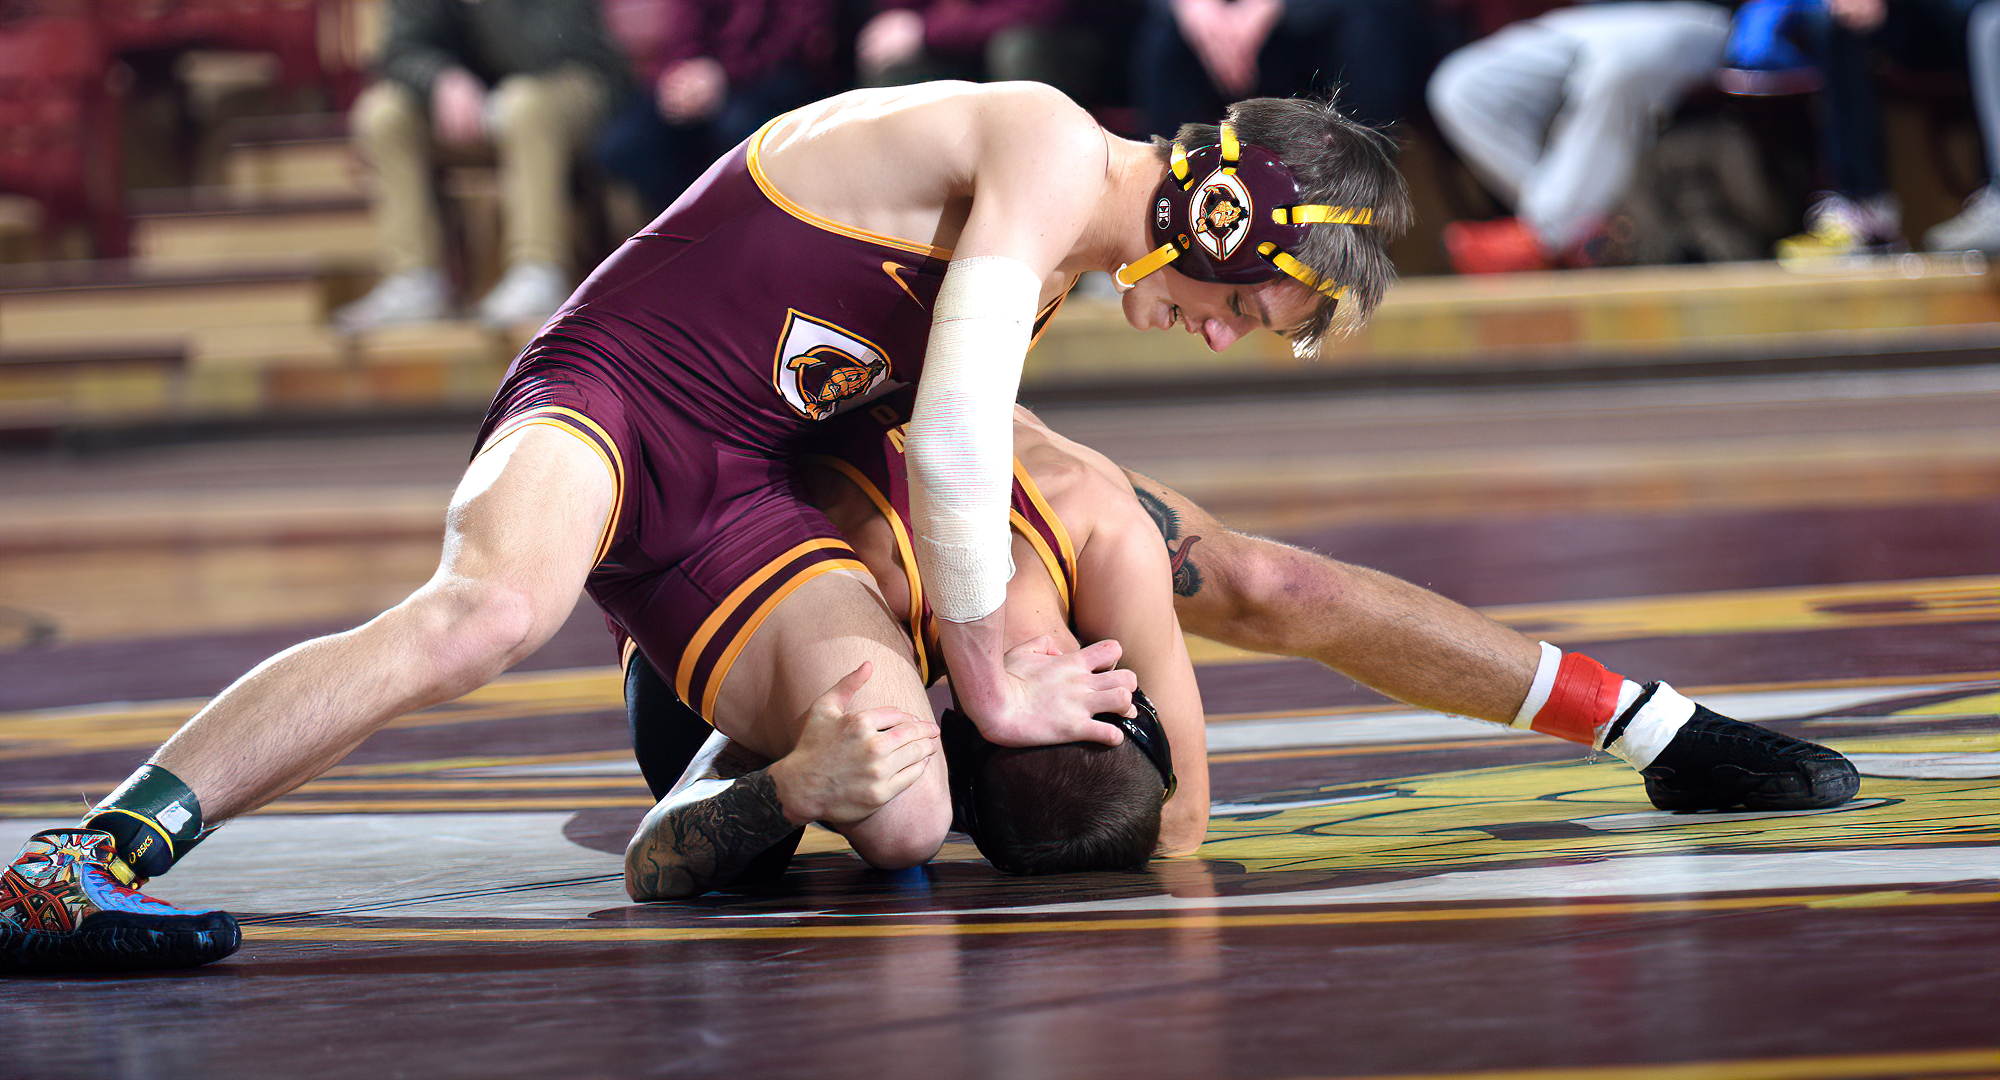 Kie Anderson was one of two weight-class winners for the Cobbers at the SJU North Country Open. He won the 125-lb class in the silver division.